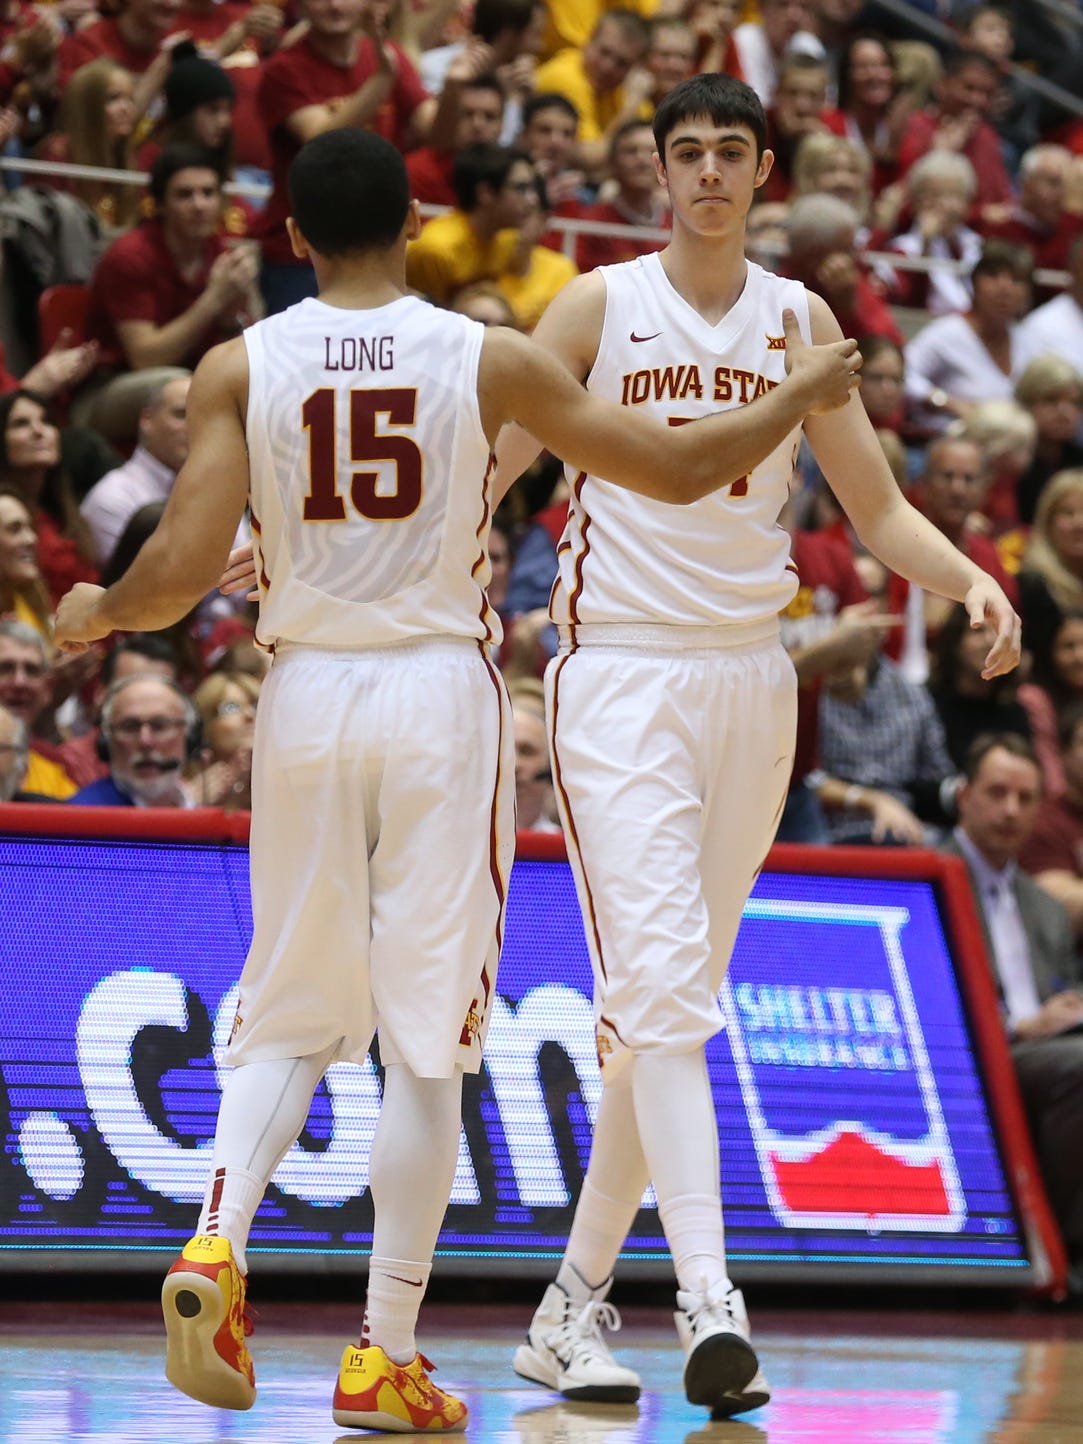 Iowa State's Georgios Tsalmpouris, right, is welcomed